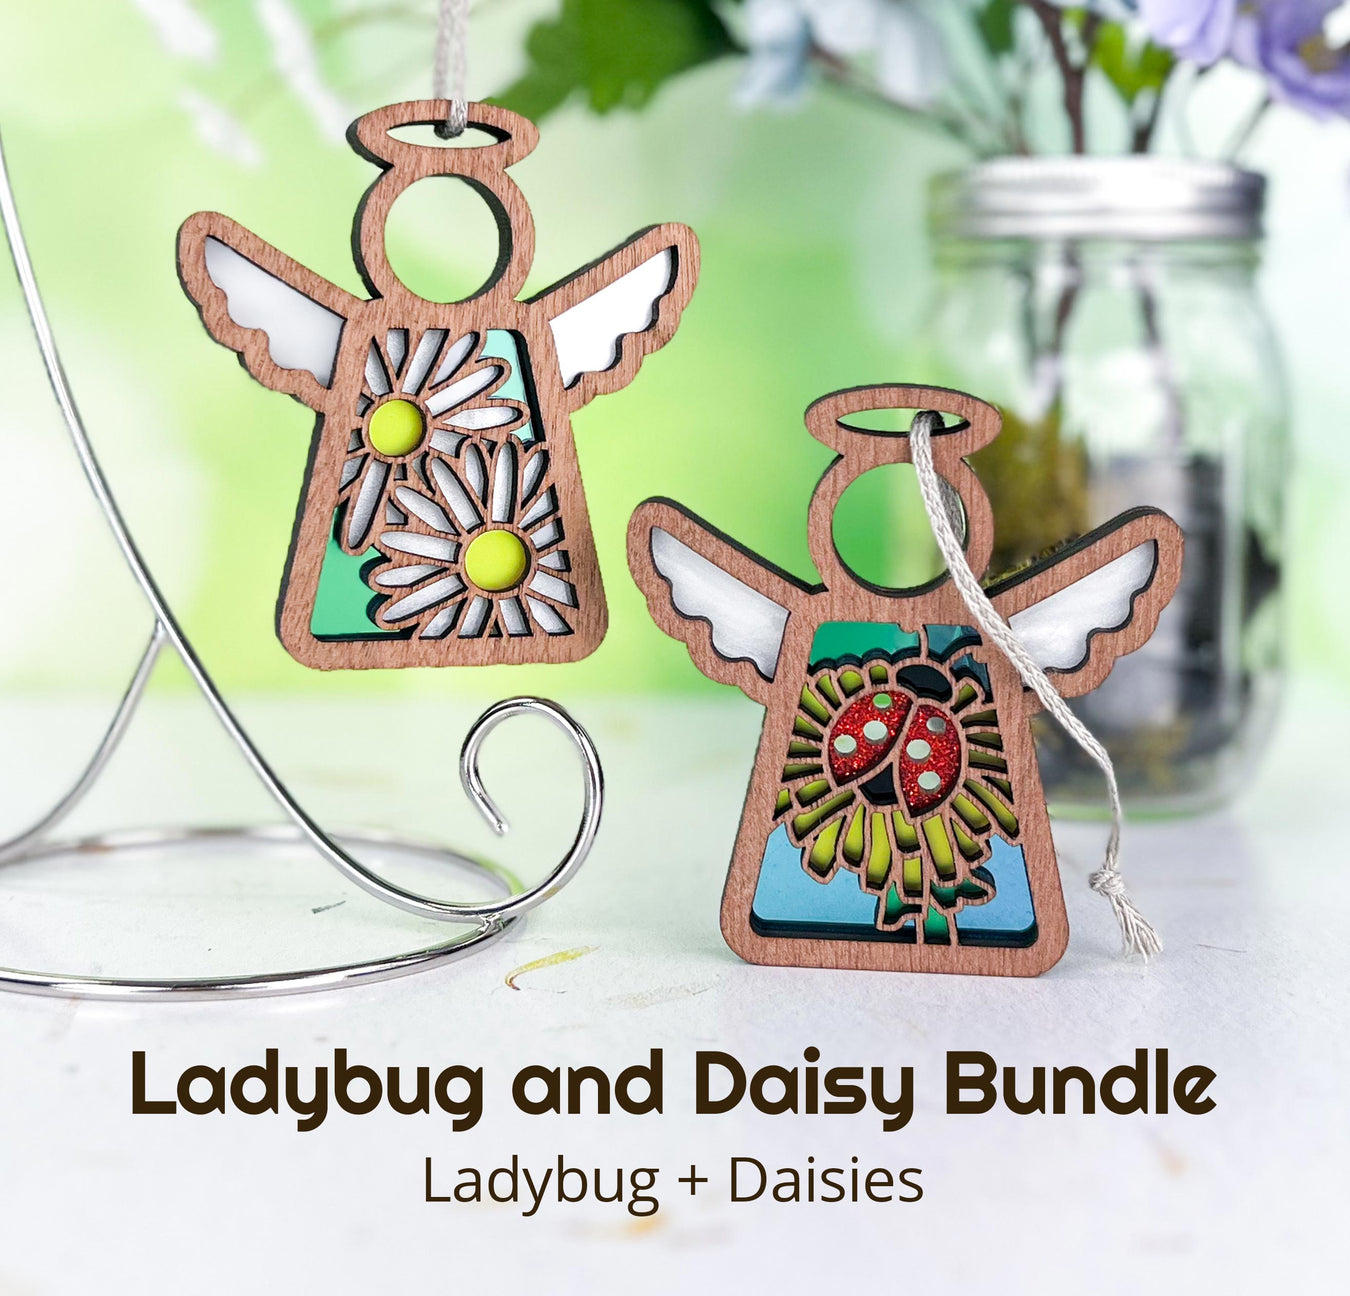 Ladybug and Daisy Bundle - Ladybug and Daisy Mother’s Angels are included.